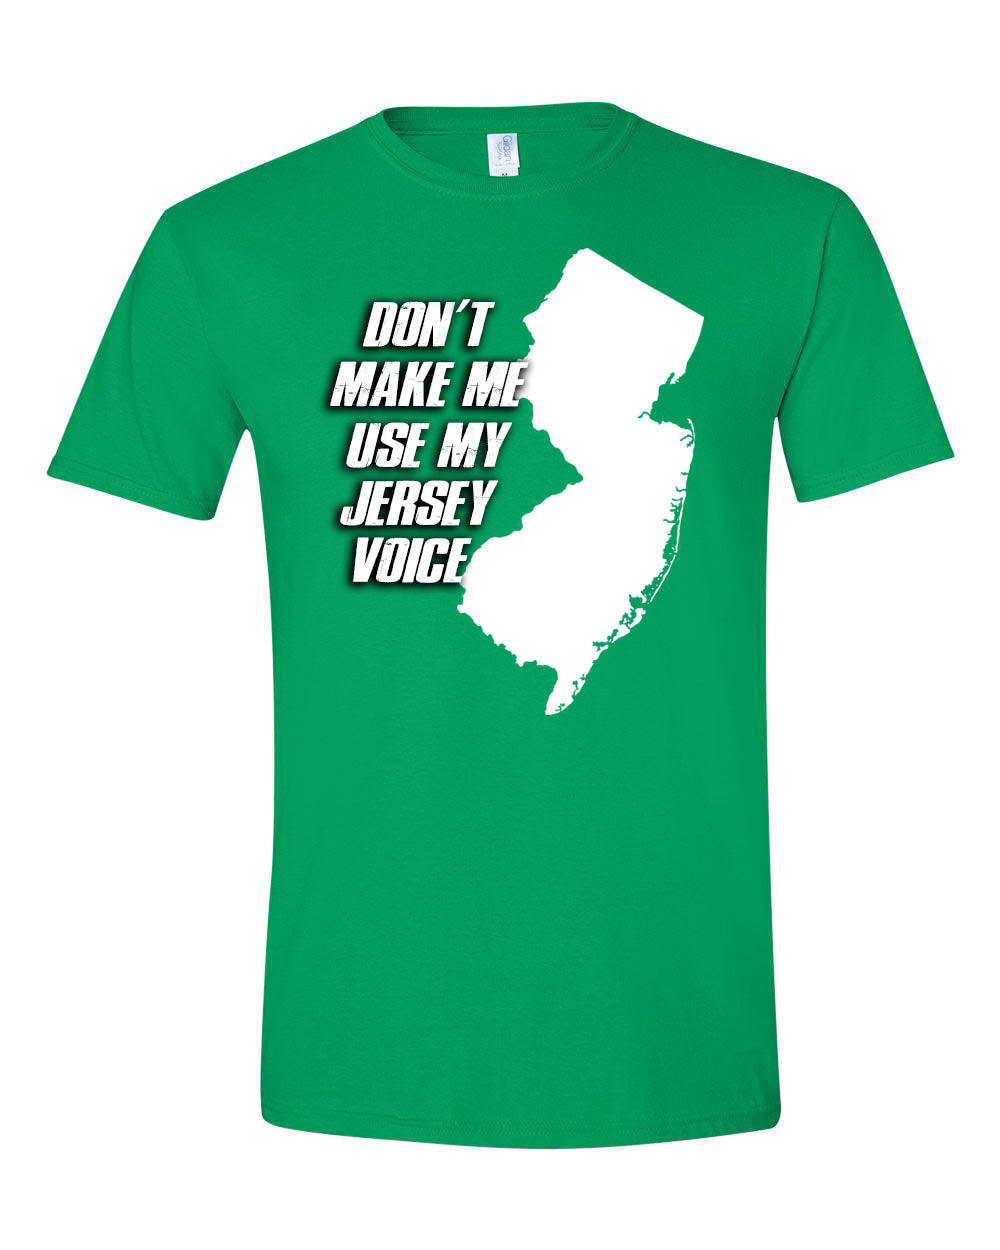 Don't make me use my New Jersey Voice T-shirt